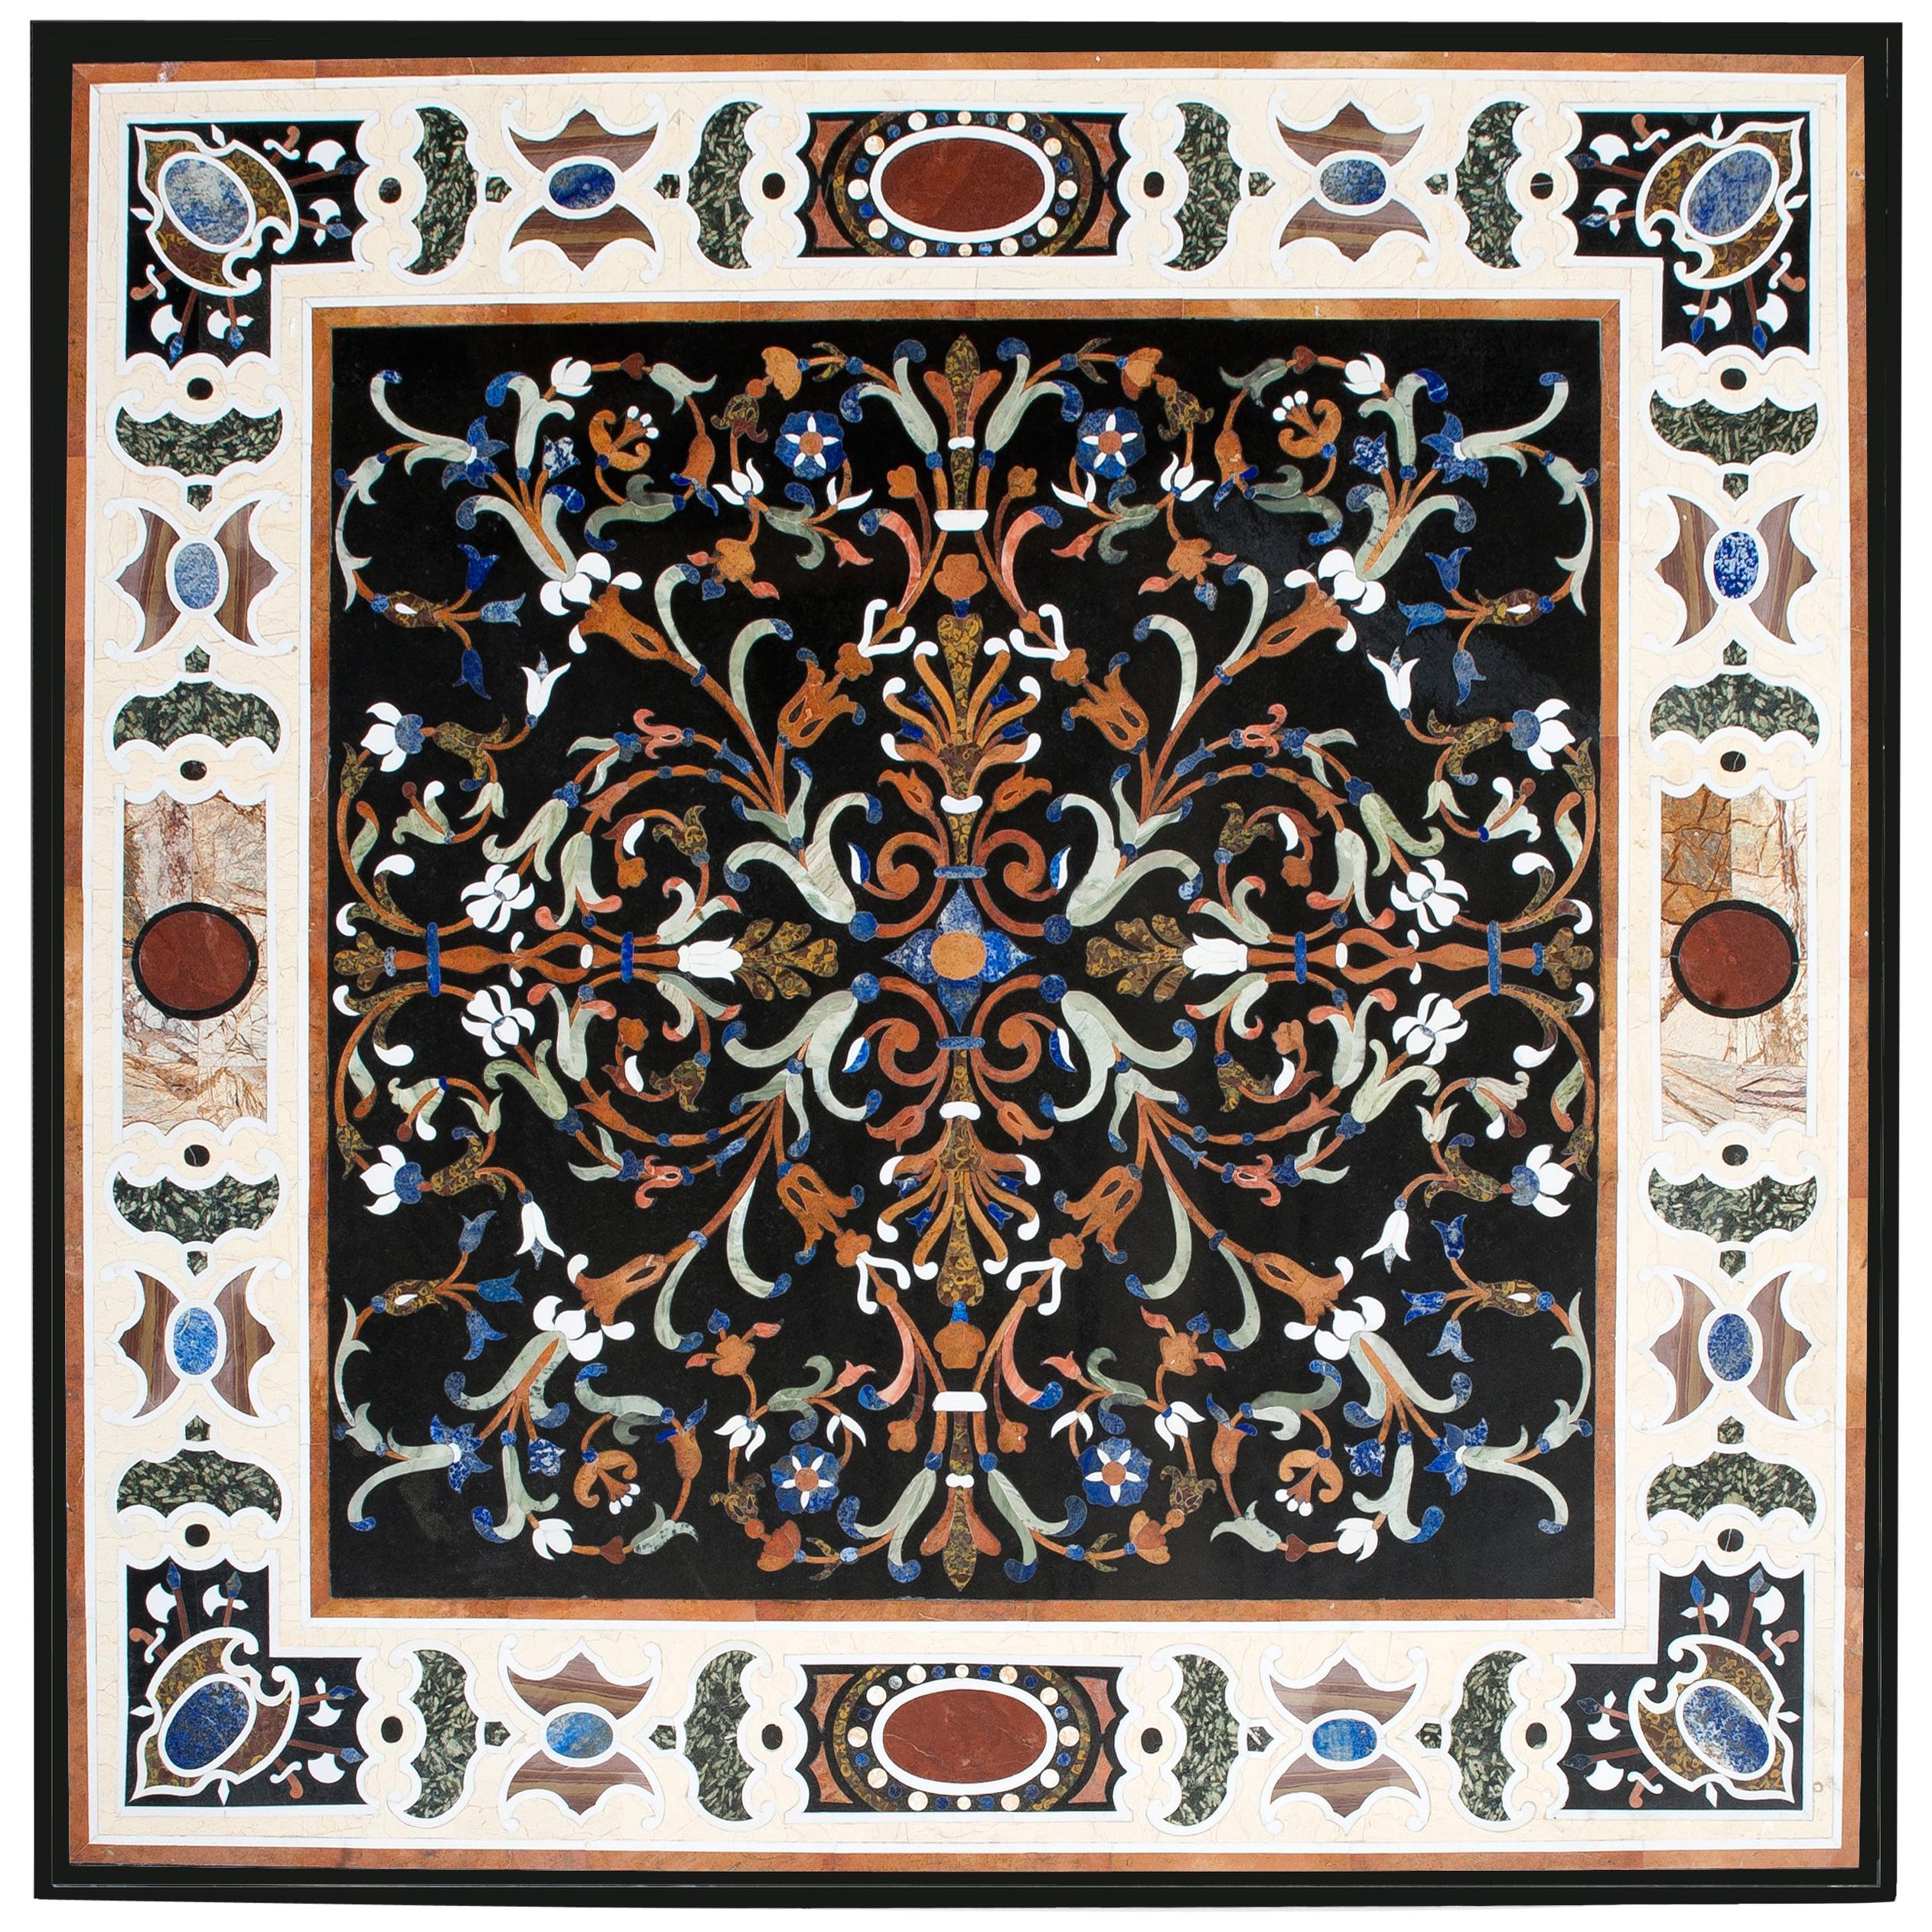 Pietra Dura Square Table Top, Inspired by Italian Models of the 16th Century